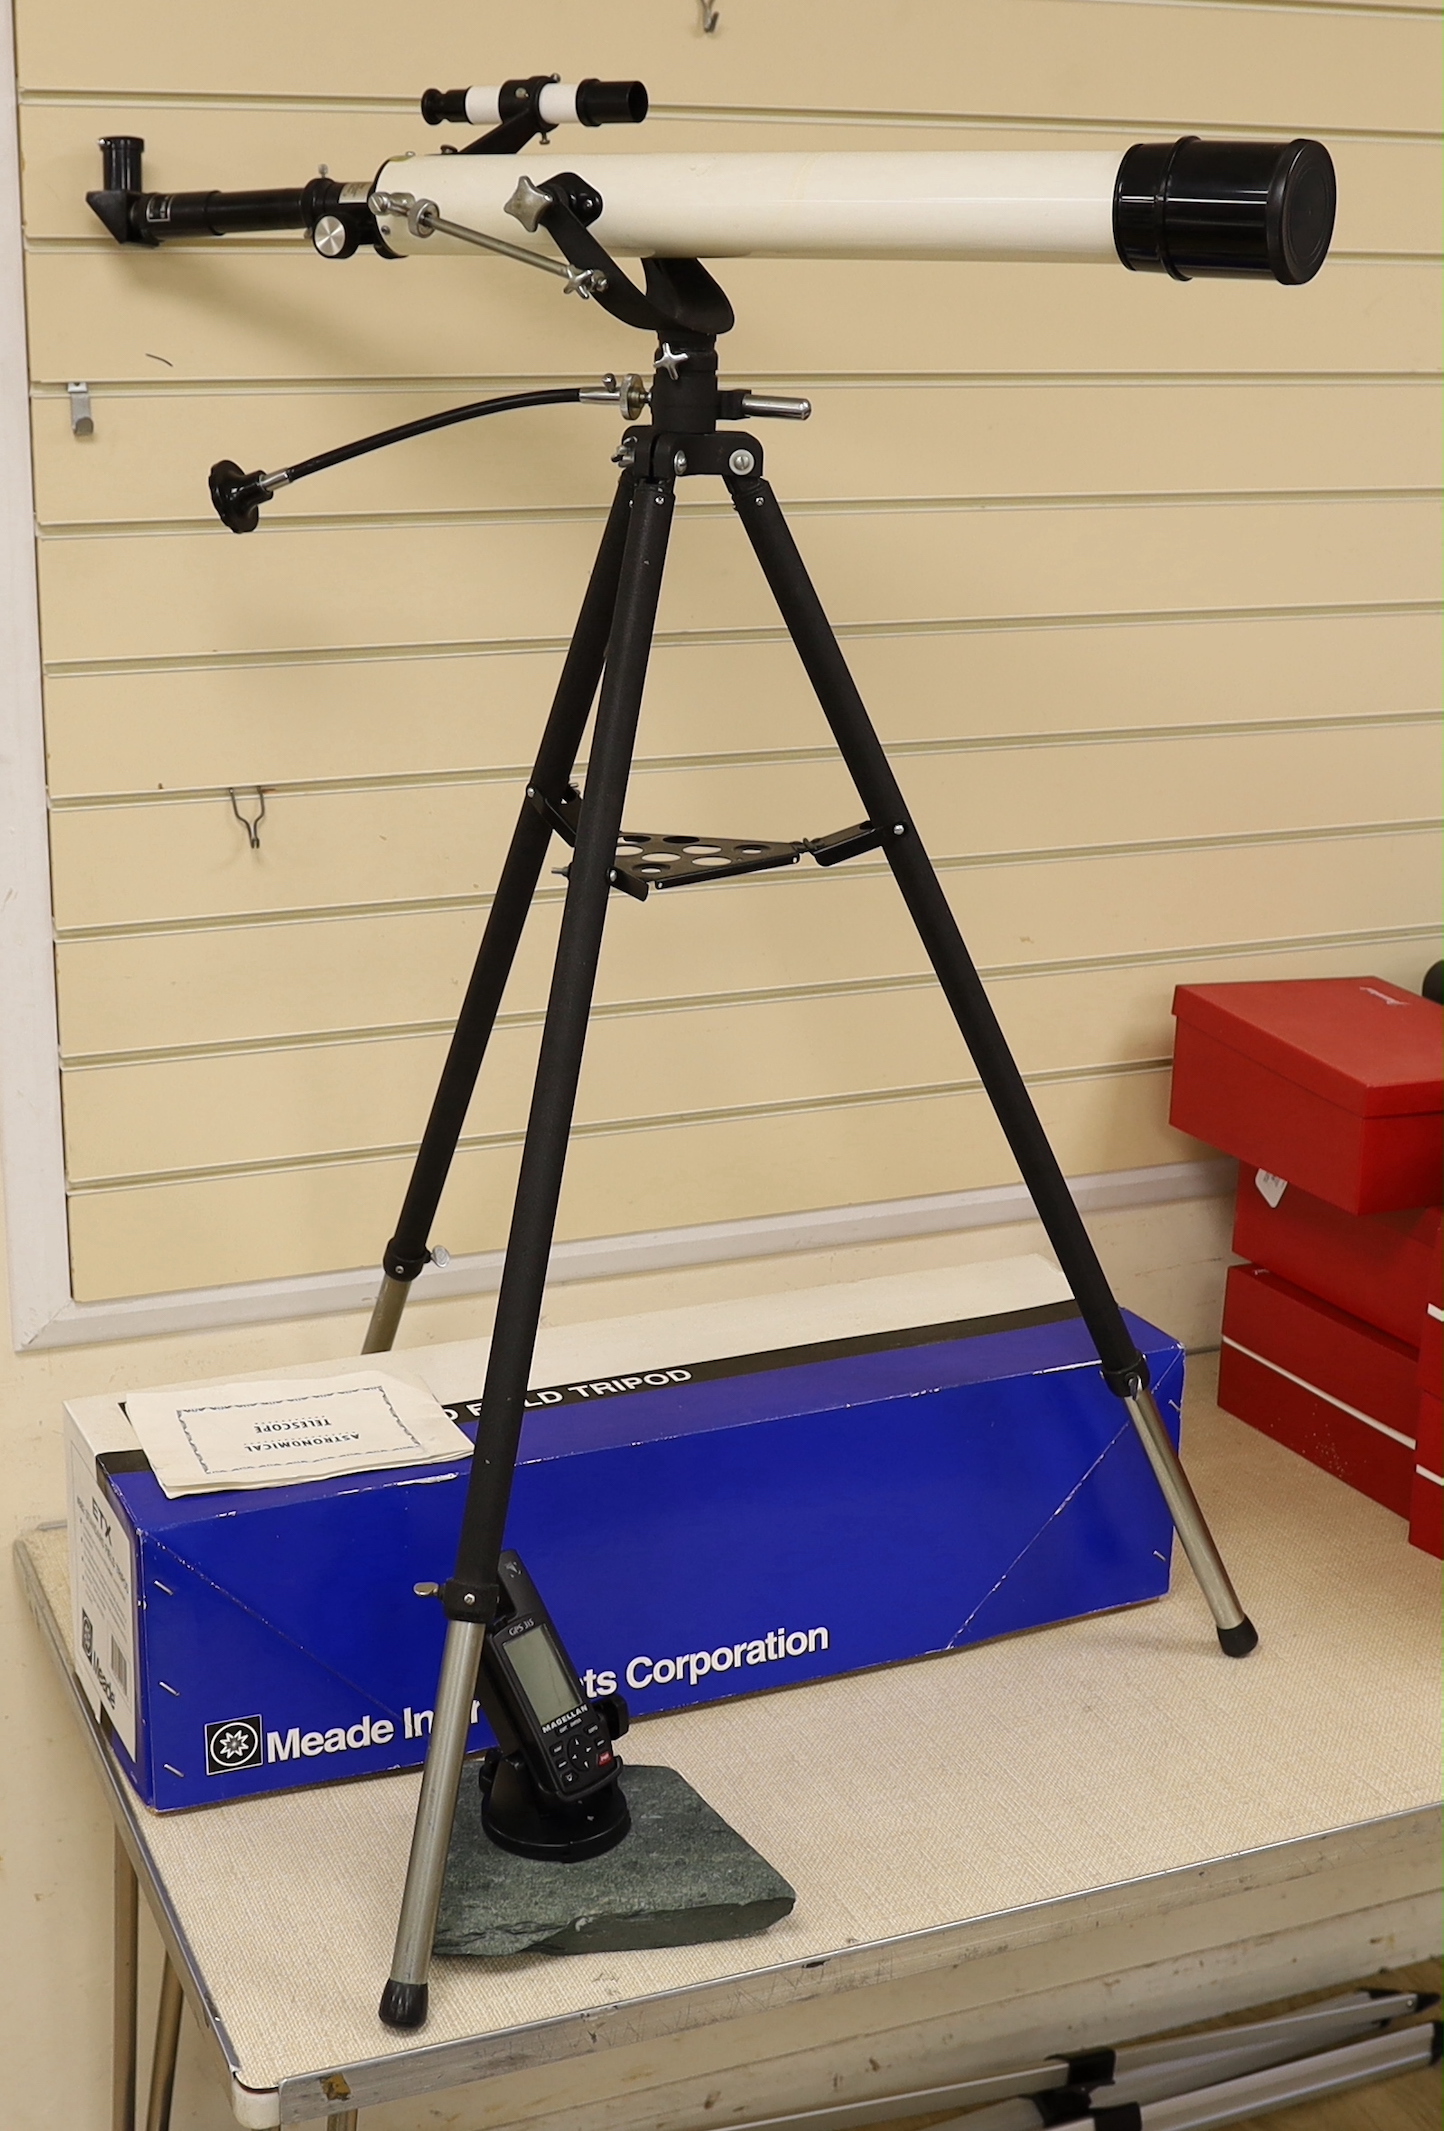 A telescope on tripod stand and a Meade scope and tripod, telescope and stand 105cm high                                                                                                                                    